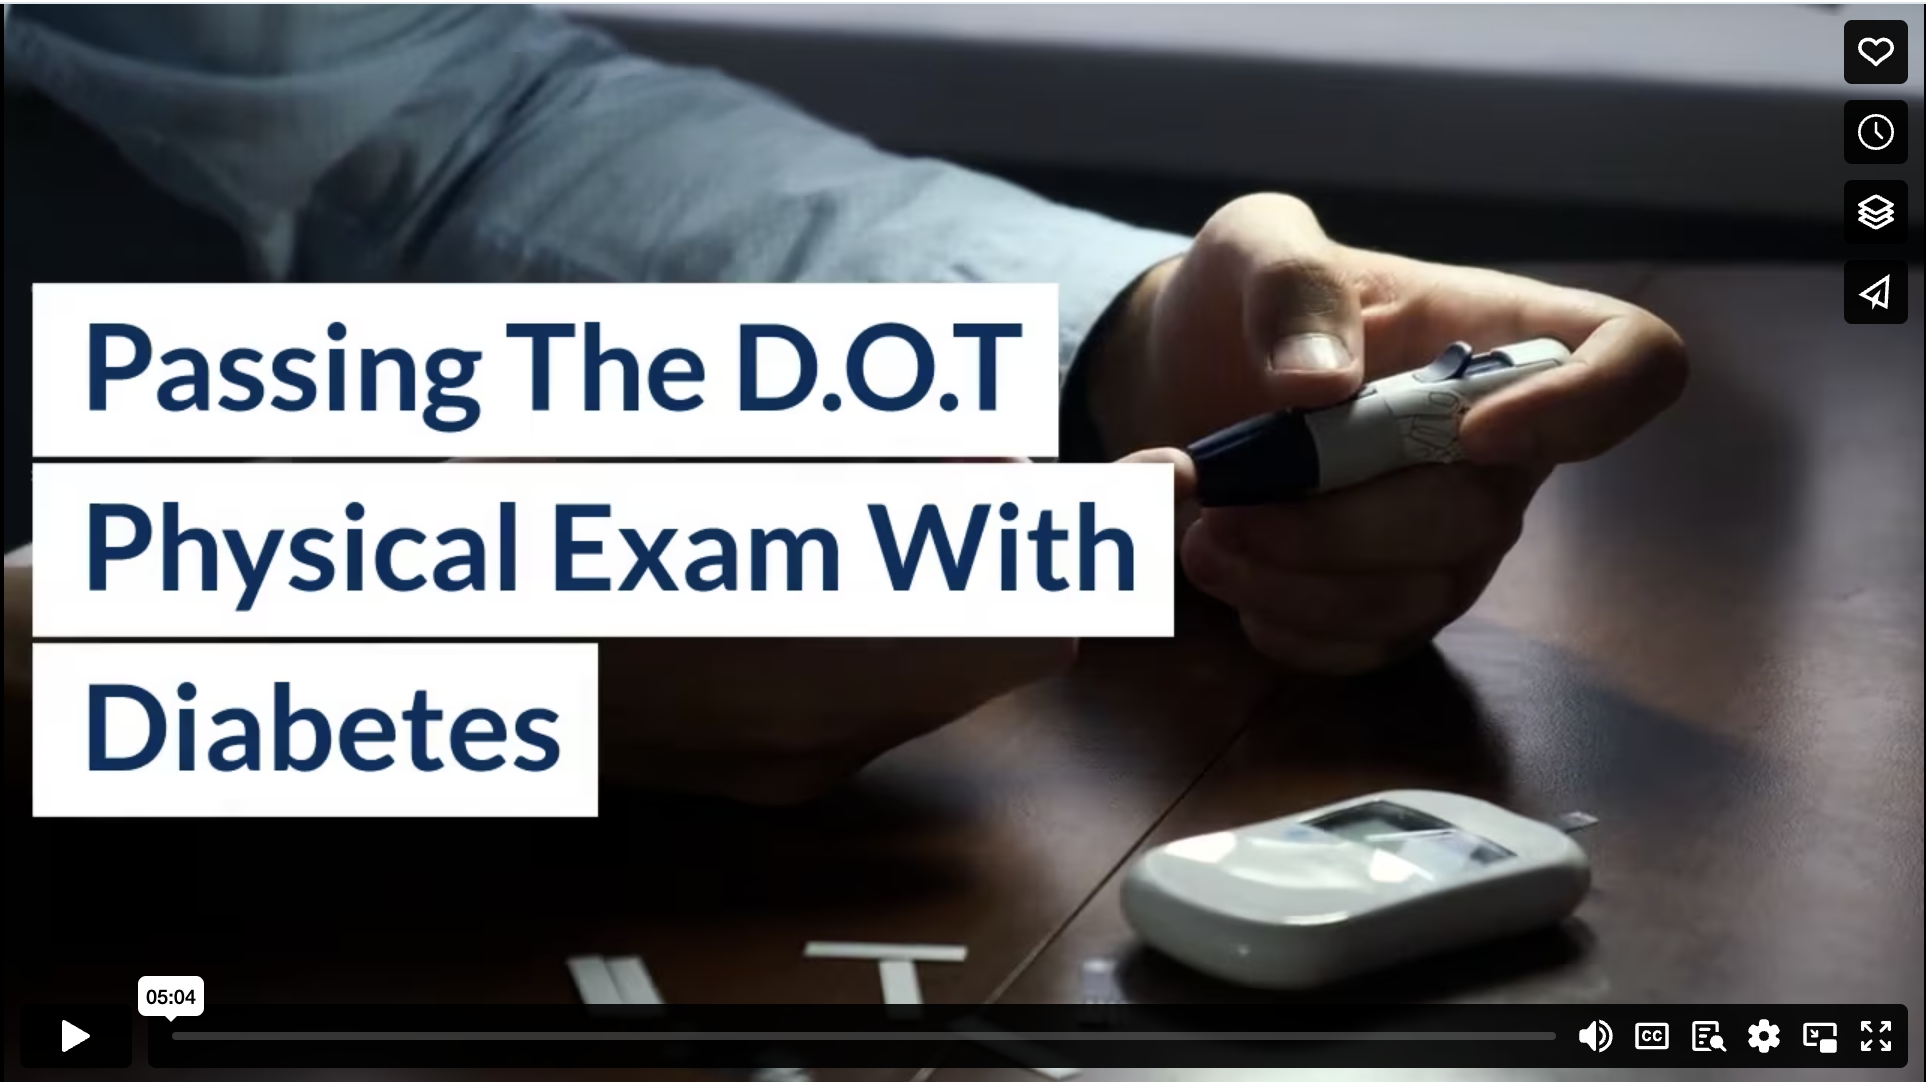 Passing The DOT Physical Exam With Diabetes